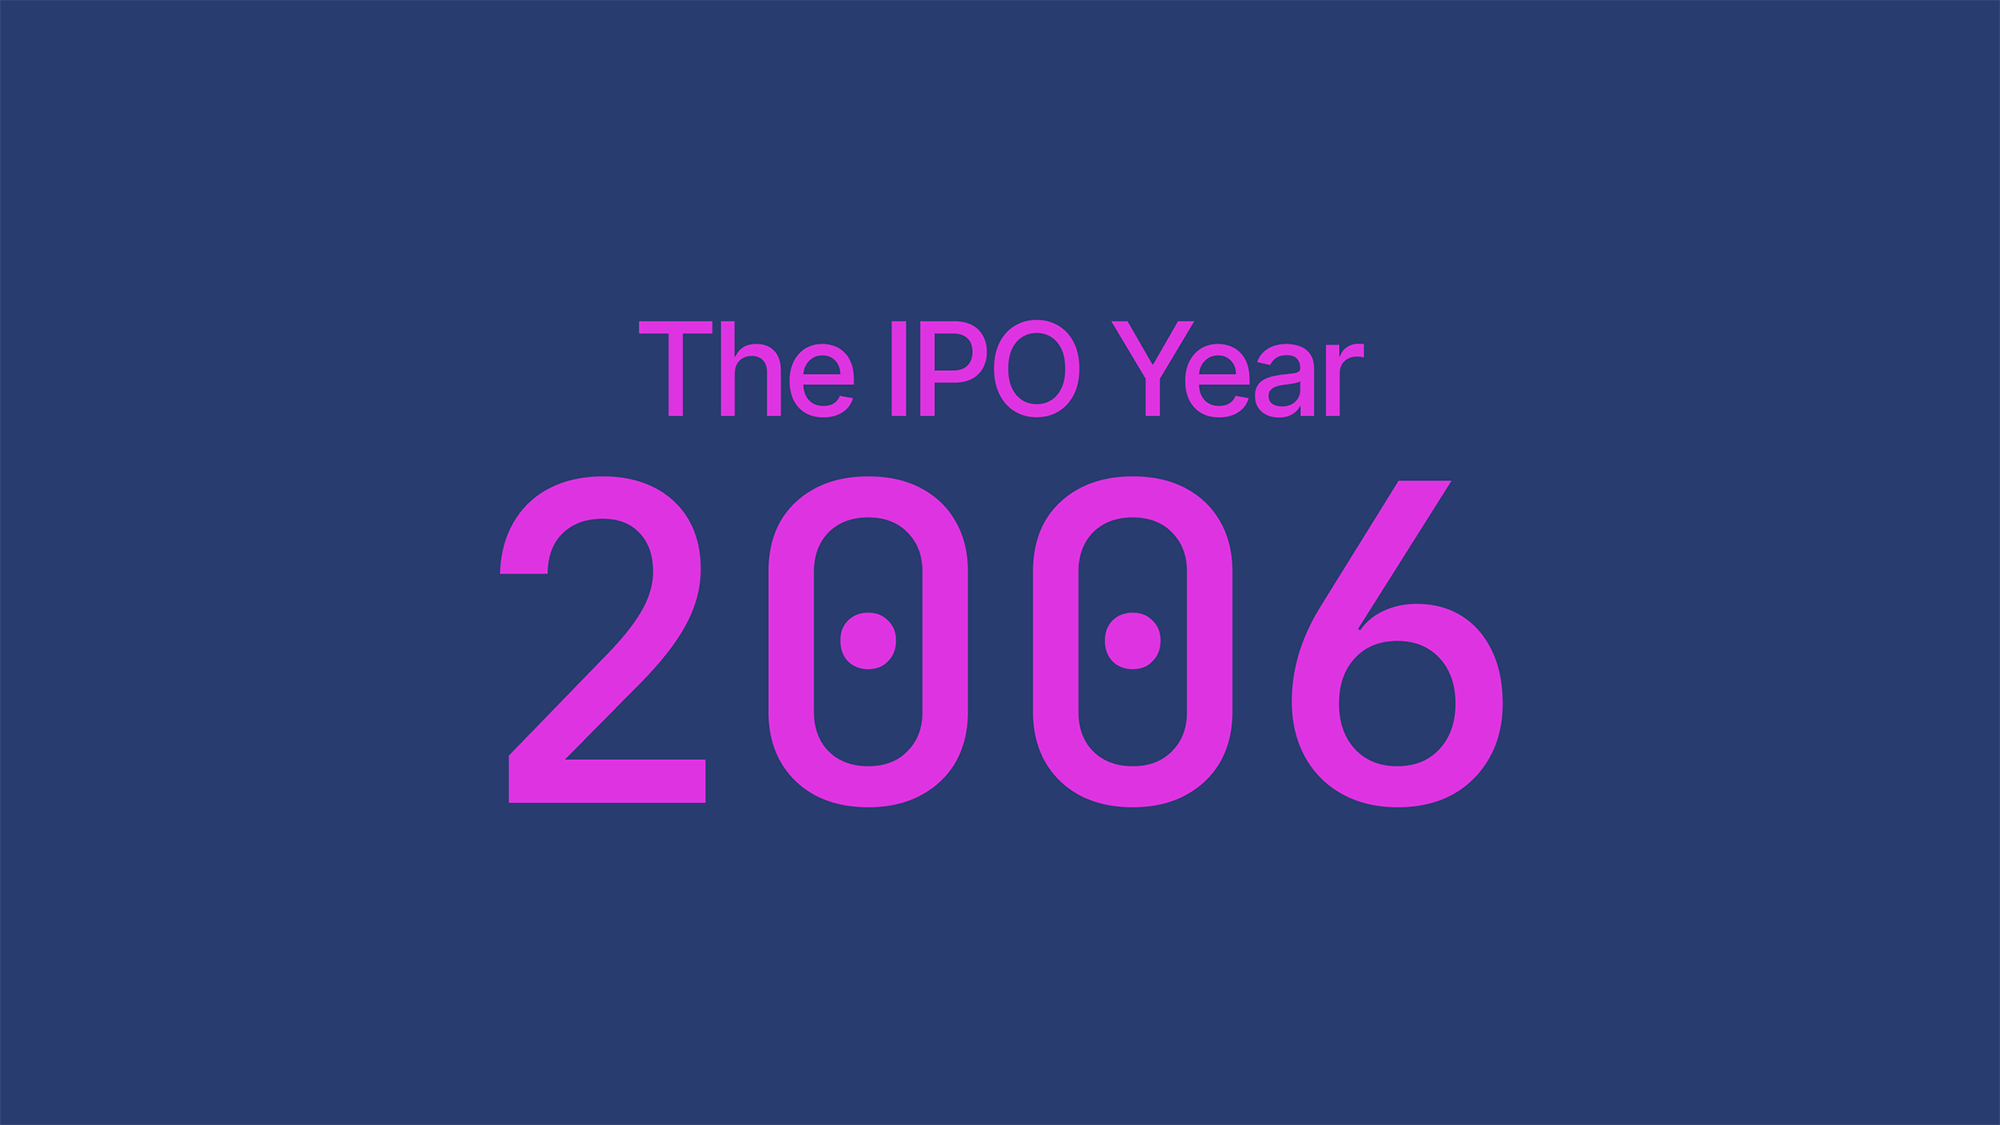 The IPO Year 2006